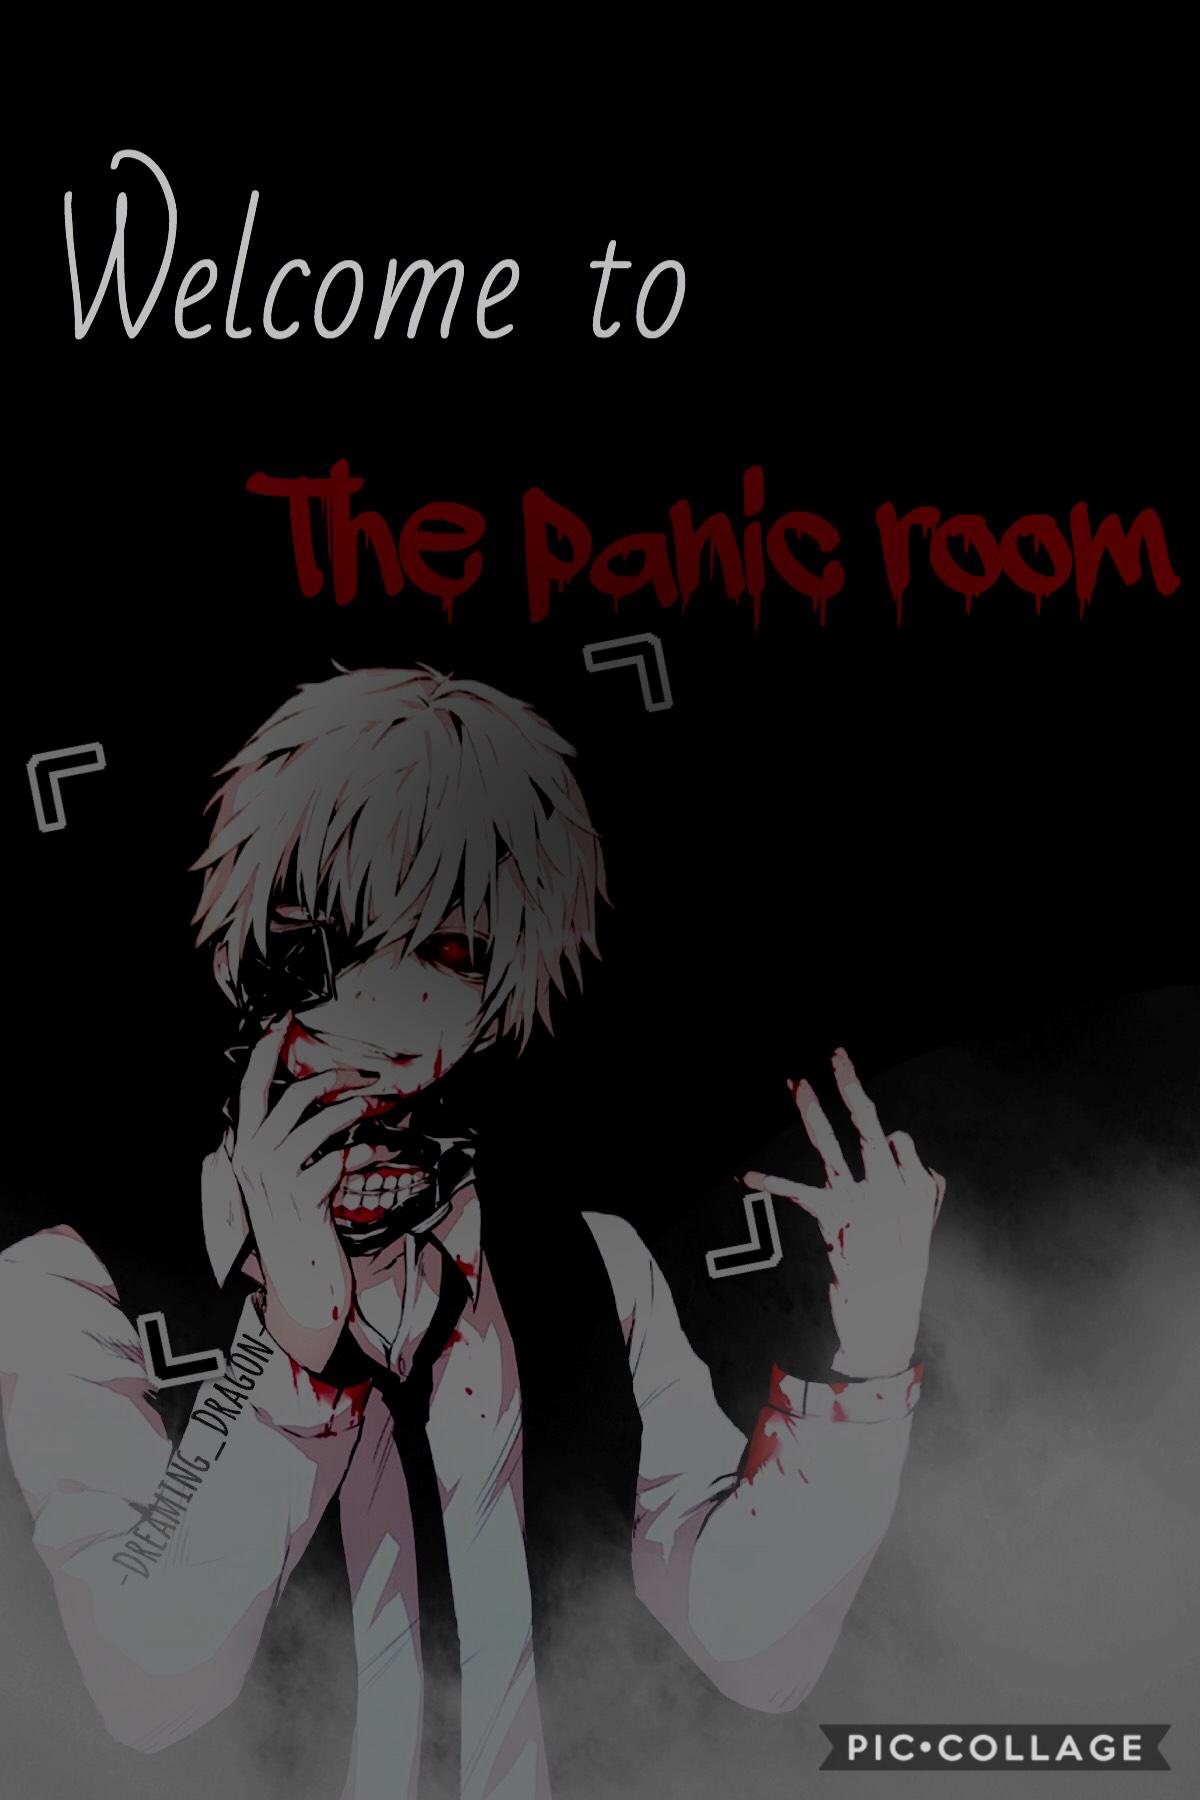 @tap@
Song: Panic Room
Artist/group: Au/Ra

I’m not eating enough and I haven’t slept in a long time..

😈August 16 2018😈

I’m open 4 song and edit requests! 